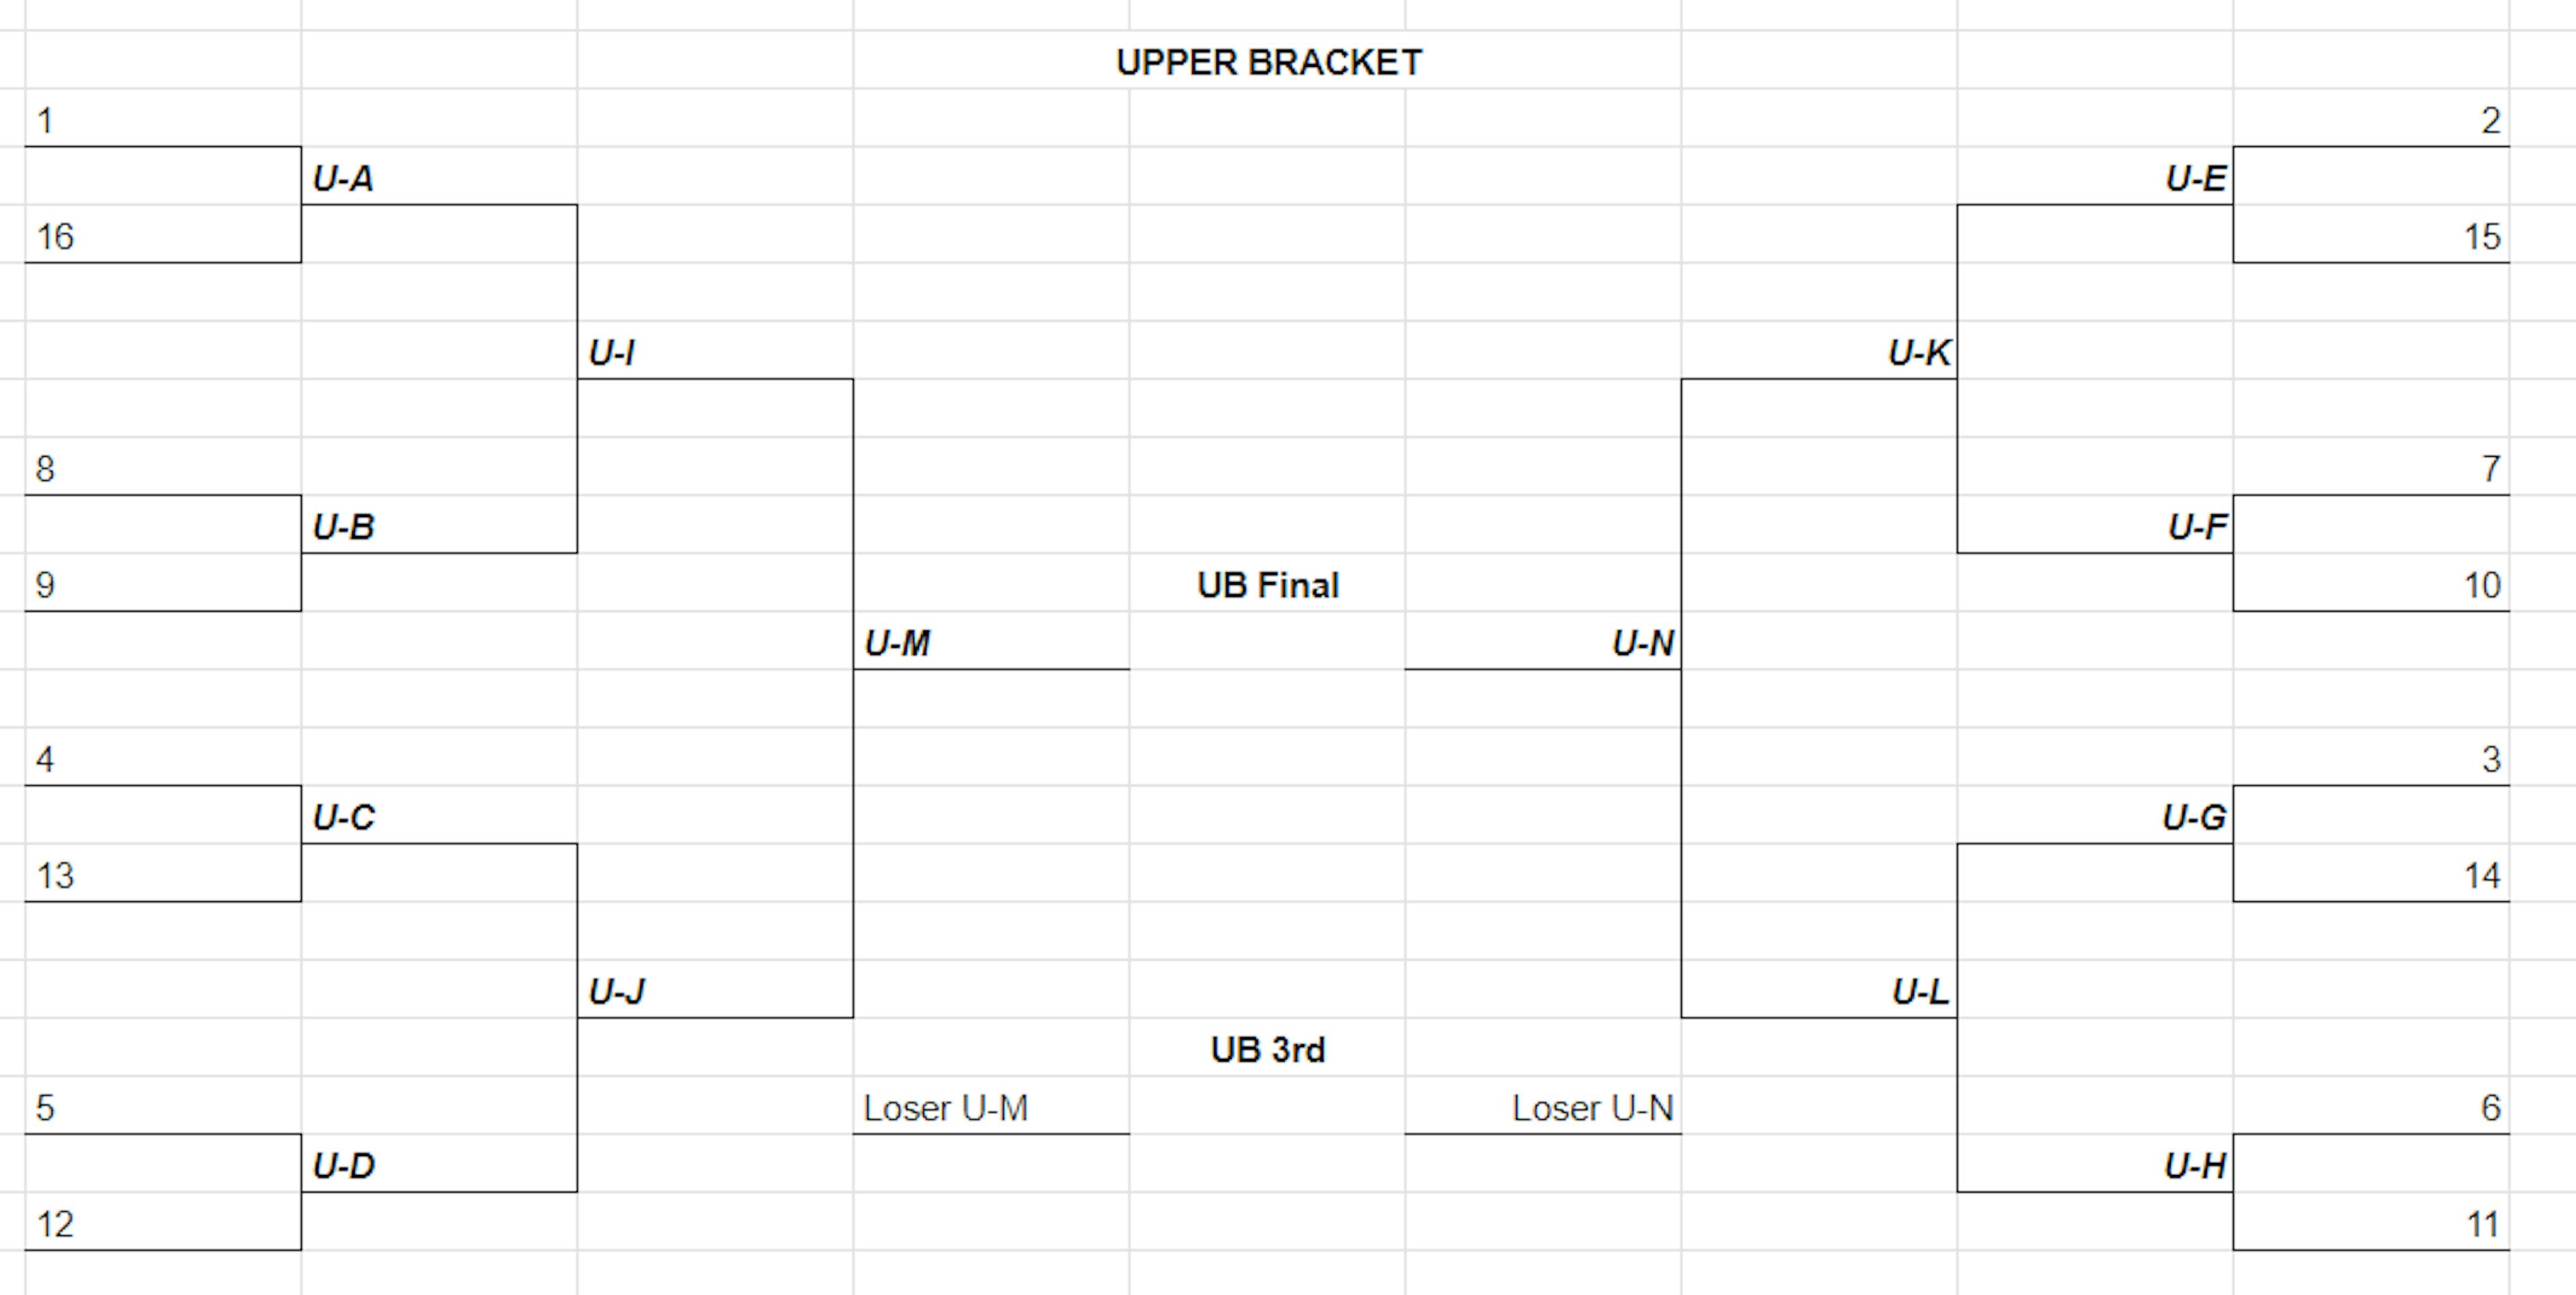 Graphic displaying the Upper bracket knockout stage